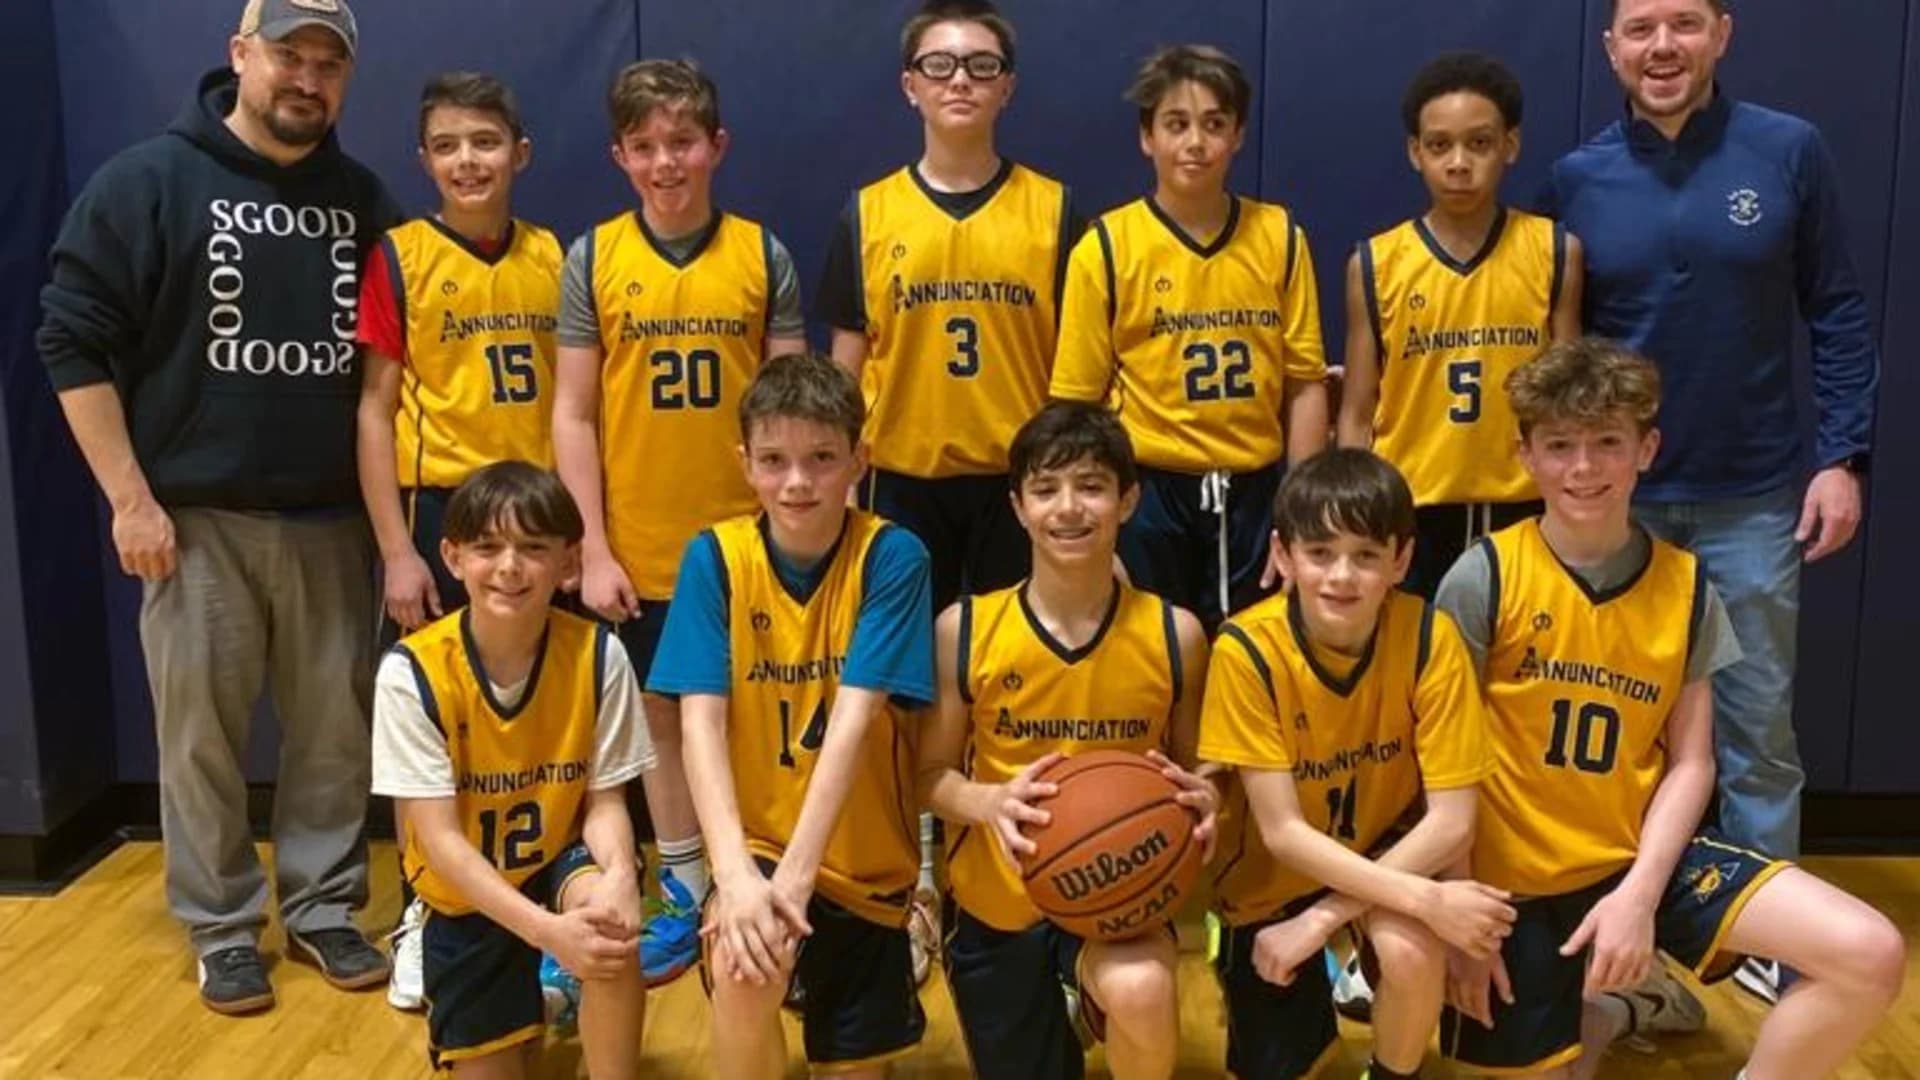 Annunciation of Yonkers sixth grade basketball team wins CYO archdiocesan state championship